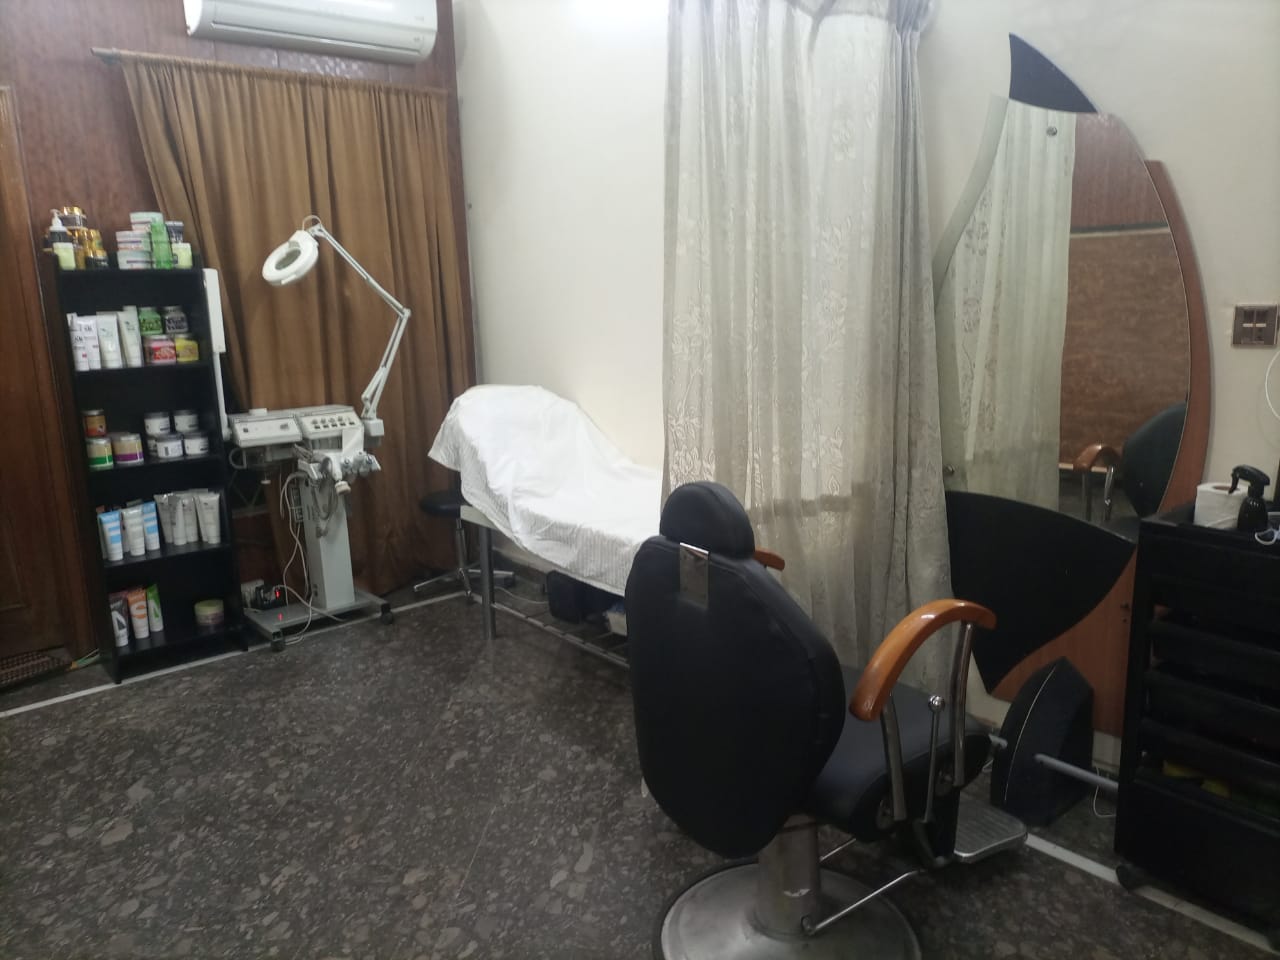 Neutrogena Whitening / Acne Facial with Hi Frequency + Full Arms Wax & Full Wax OR Whitening Manicure & Whitening Pedicure with Polisher + Threading (Eye brow+Upper lips) by Mirrors Beauty Lounge, Wapda town, Lahore.